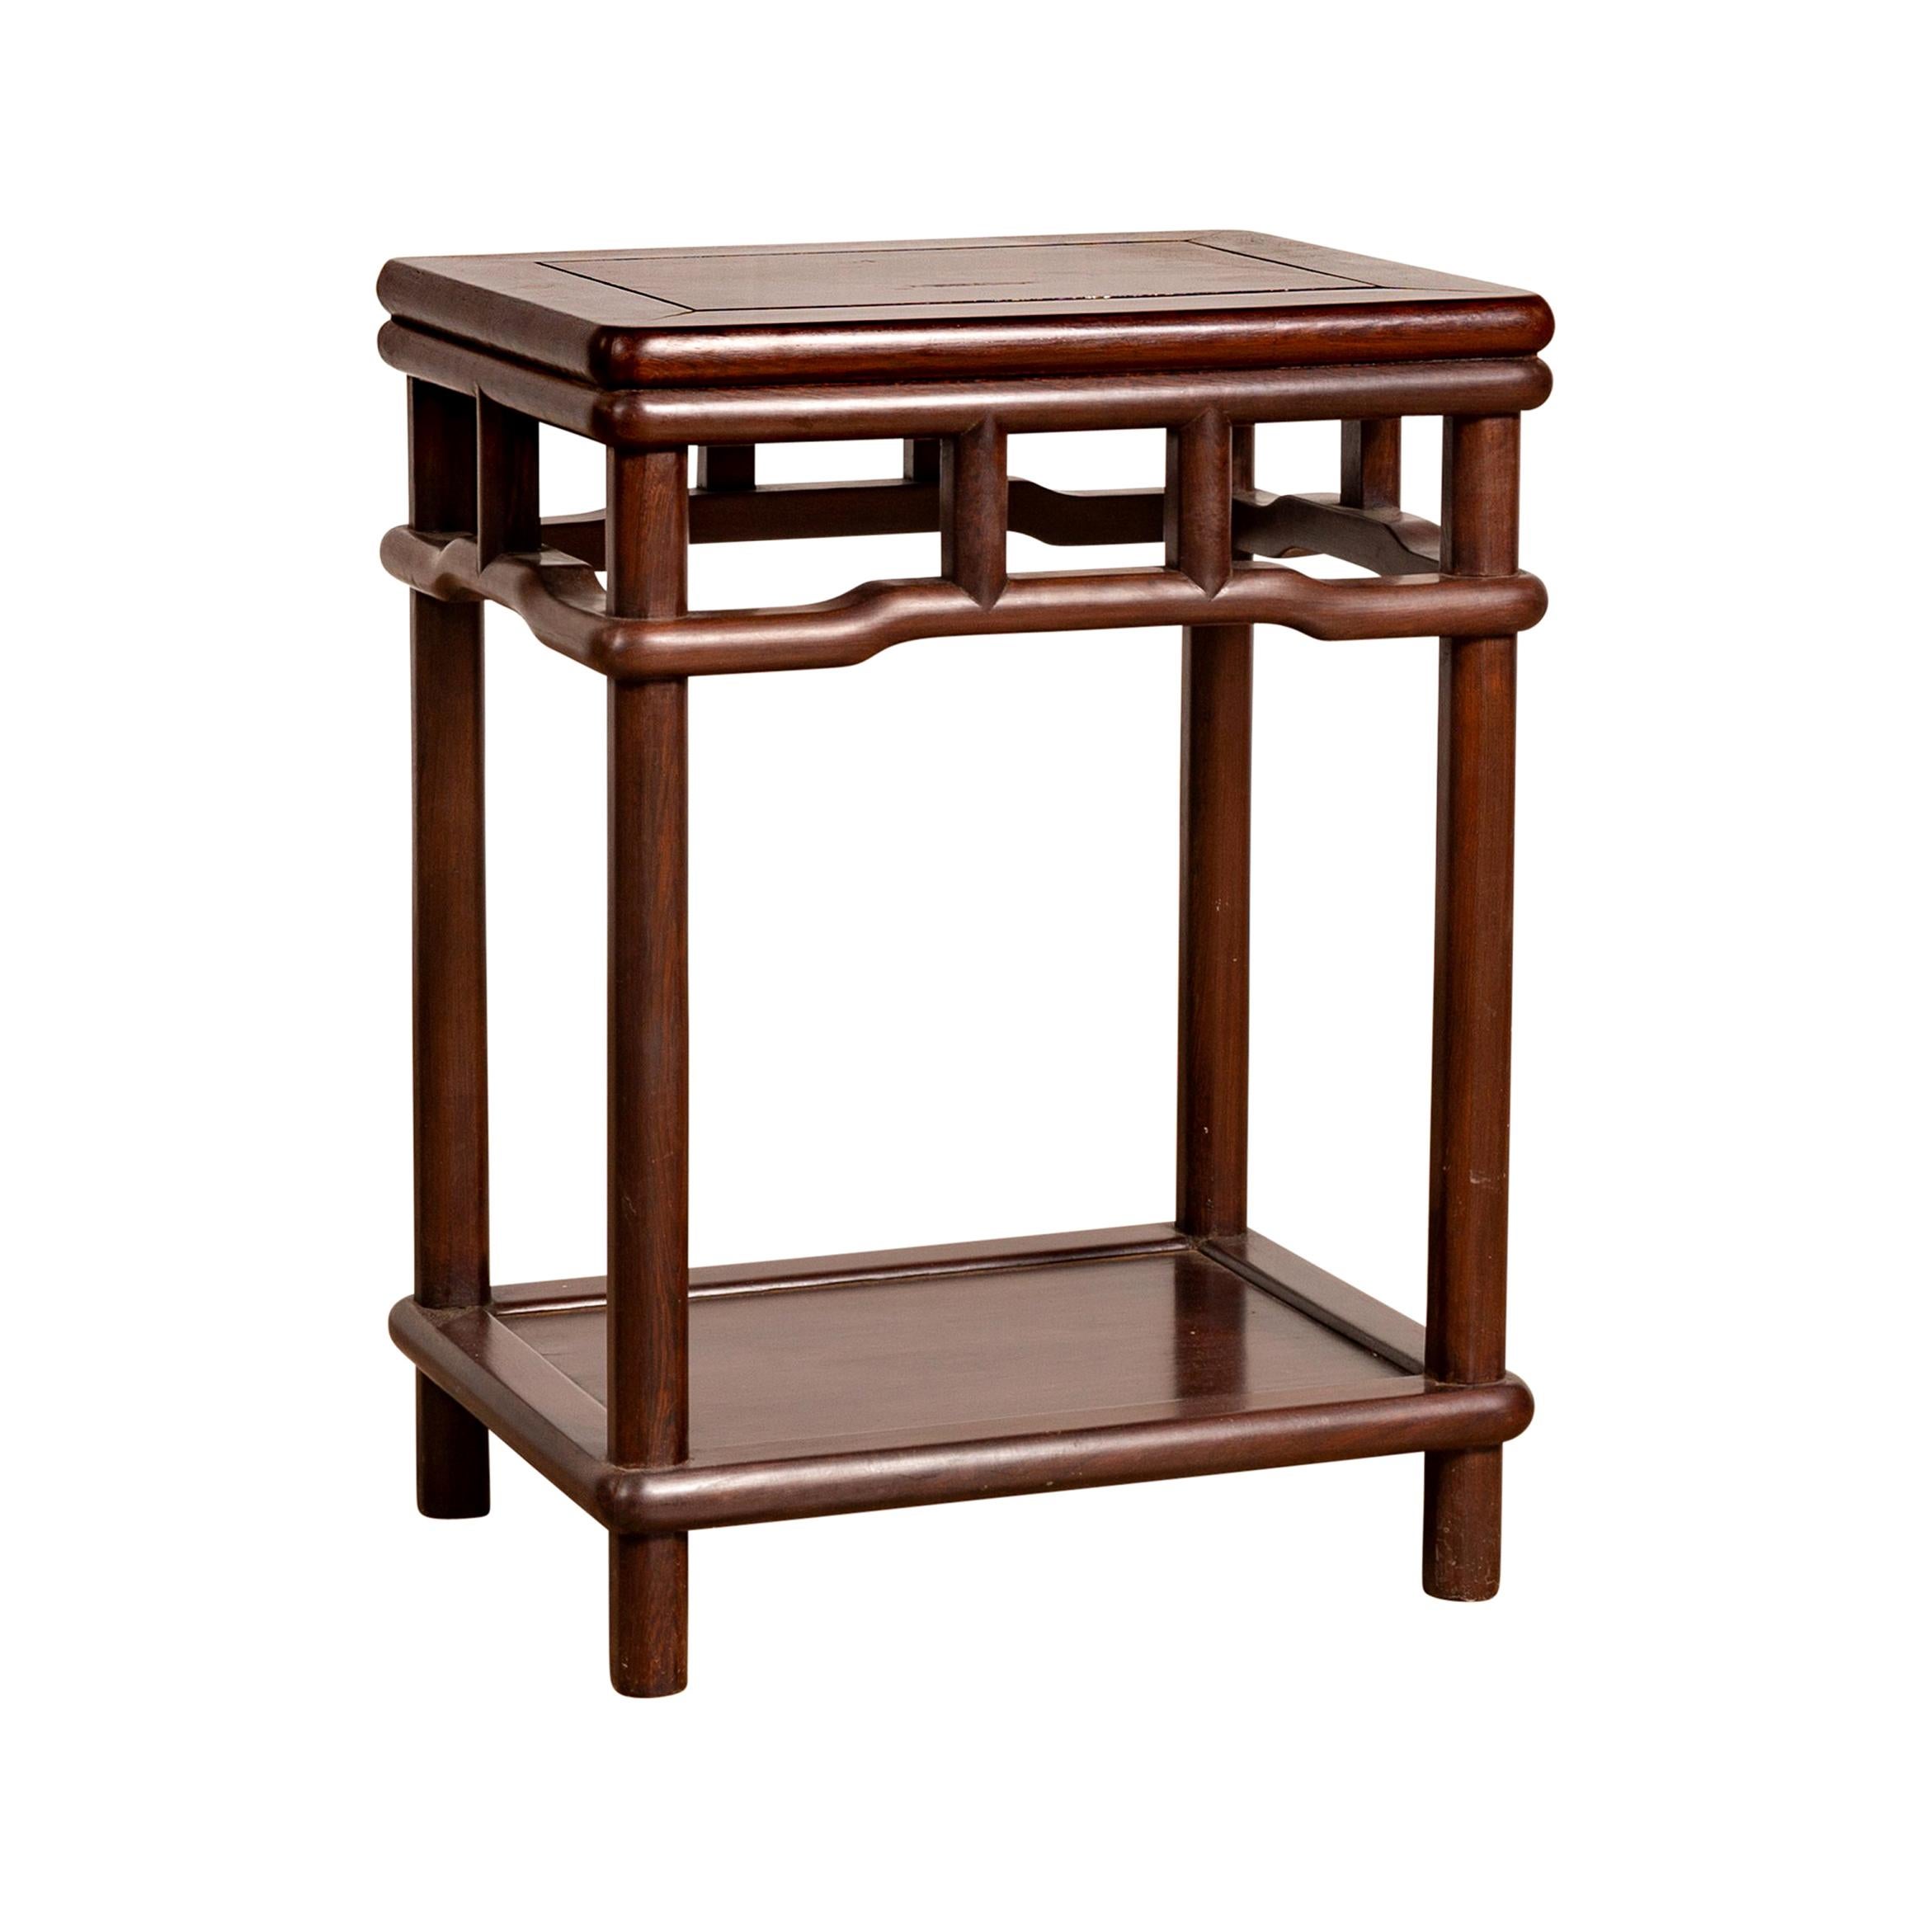 Chinese Ming Style Accent Side Table with Dark Wood Patina and Humpback Apron For Sale